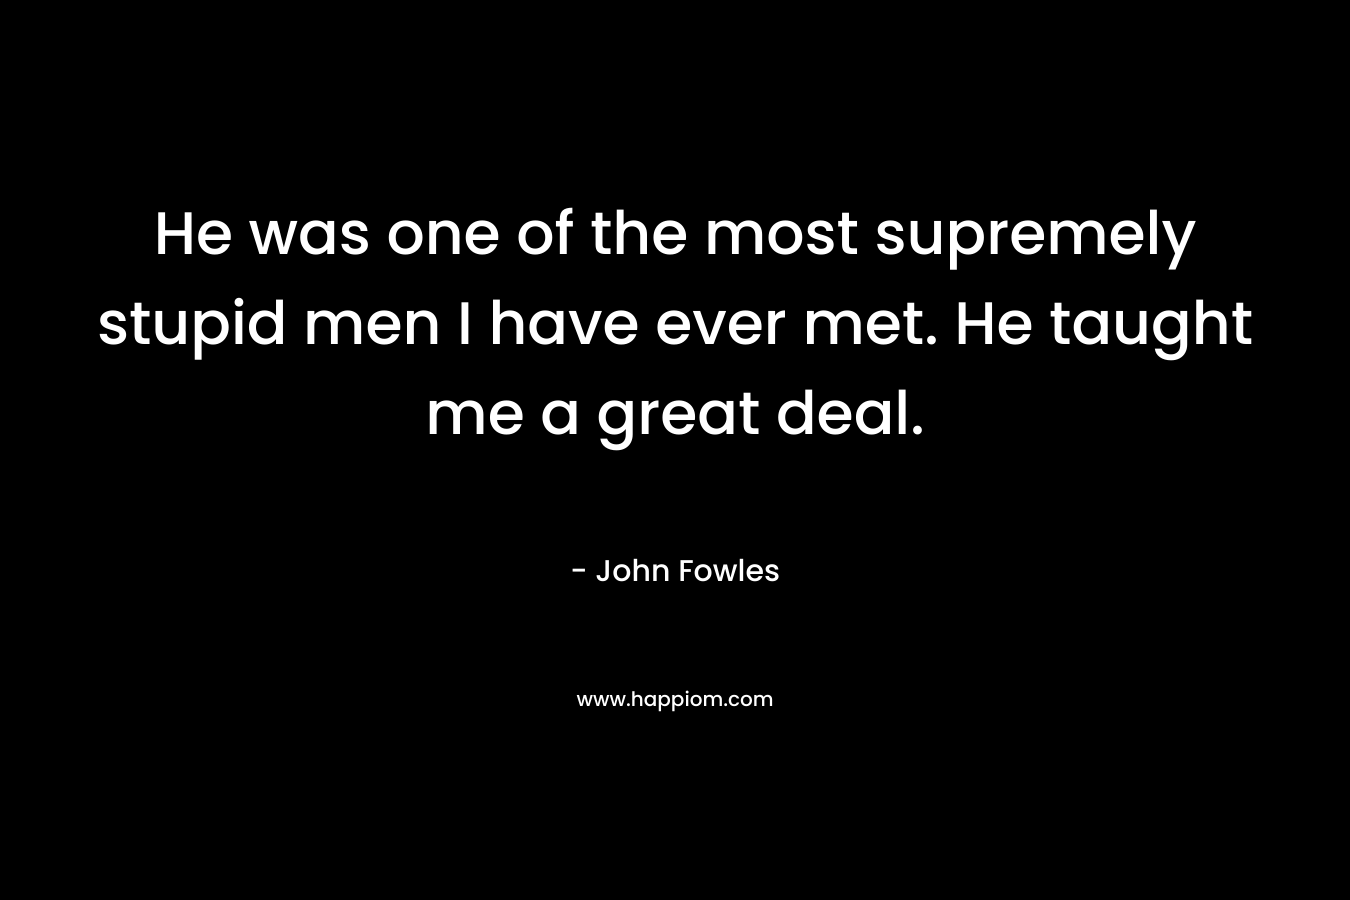 He was one of the most supremely stupid men I have ever met. He taught me a great deal. – John Fowles